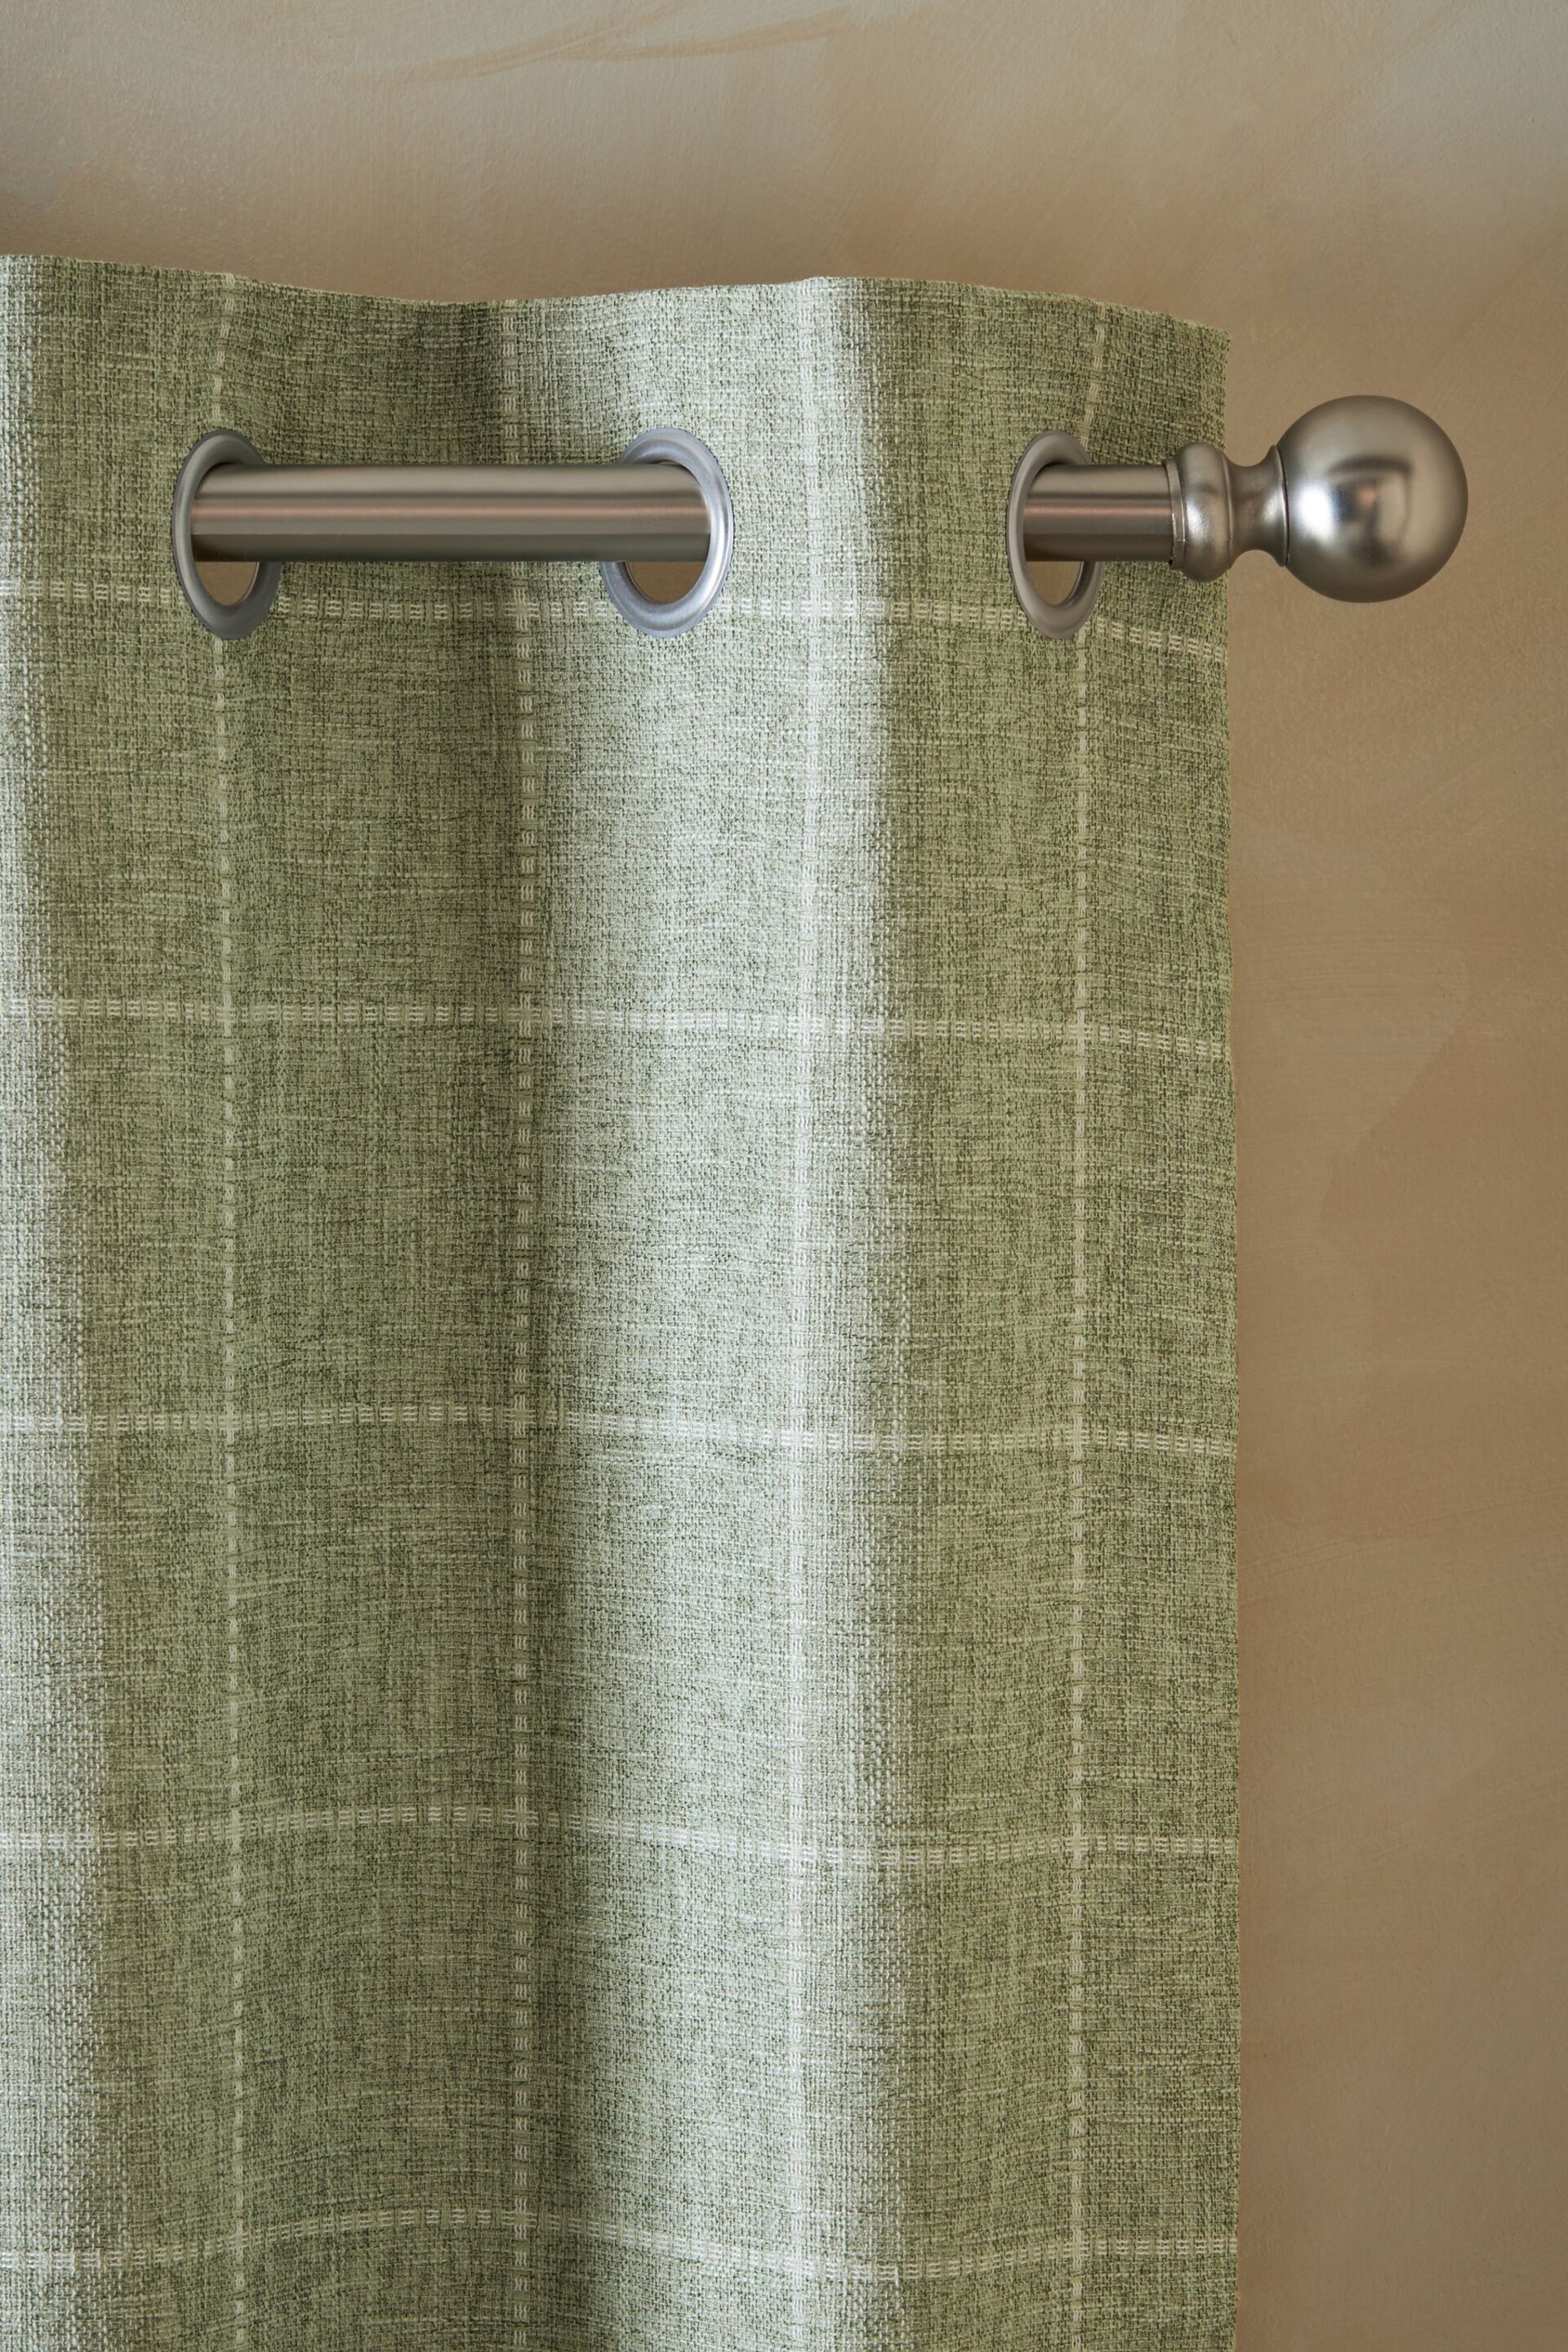 Sage Green Windowpane Check Lined Eyelet Curtains - Image 4 of 5